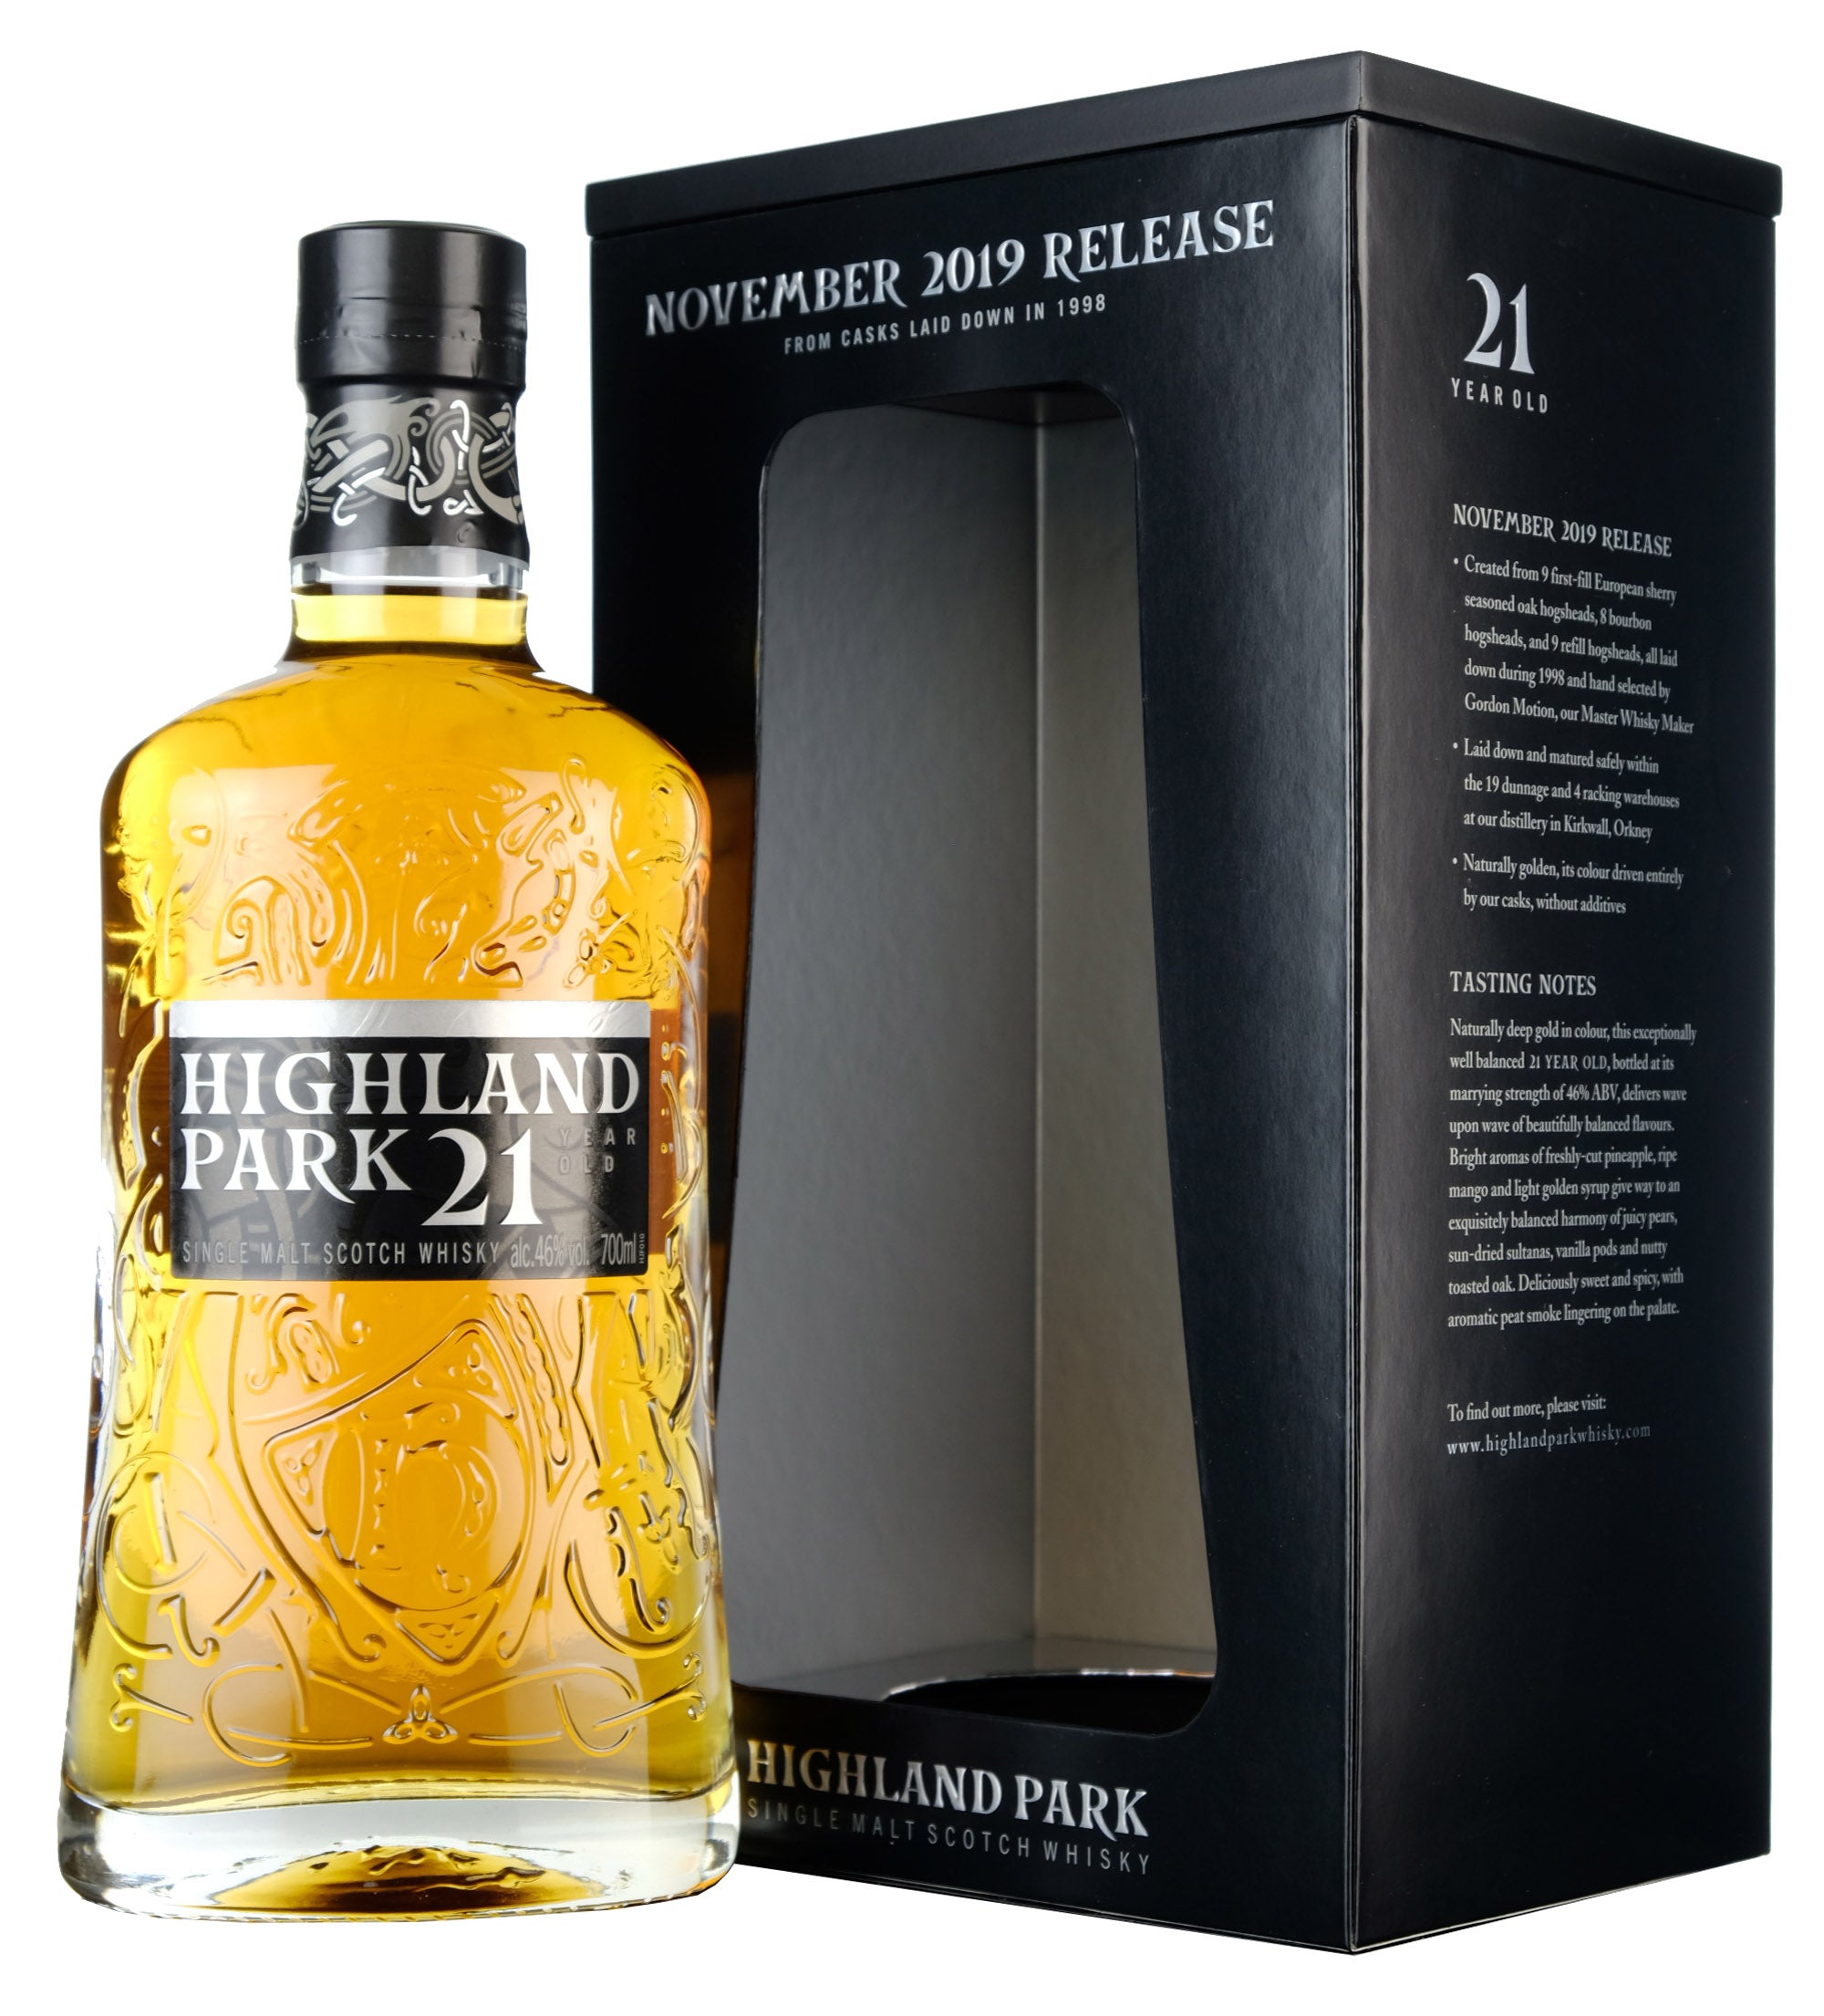 Highland Park 21 Year Old 2019 Release